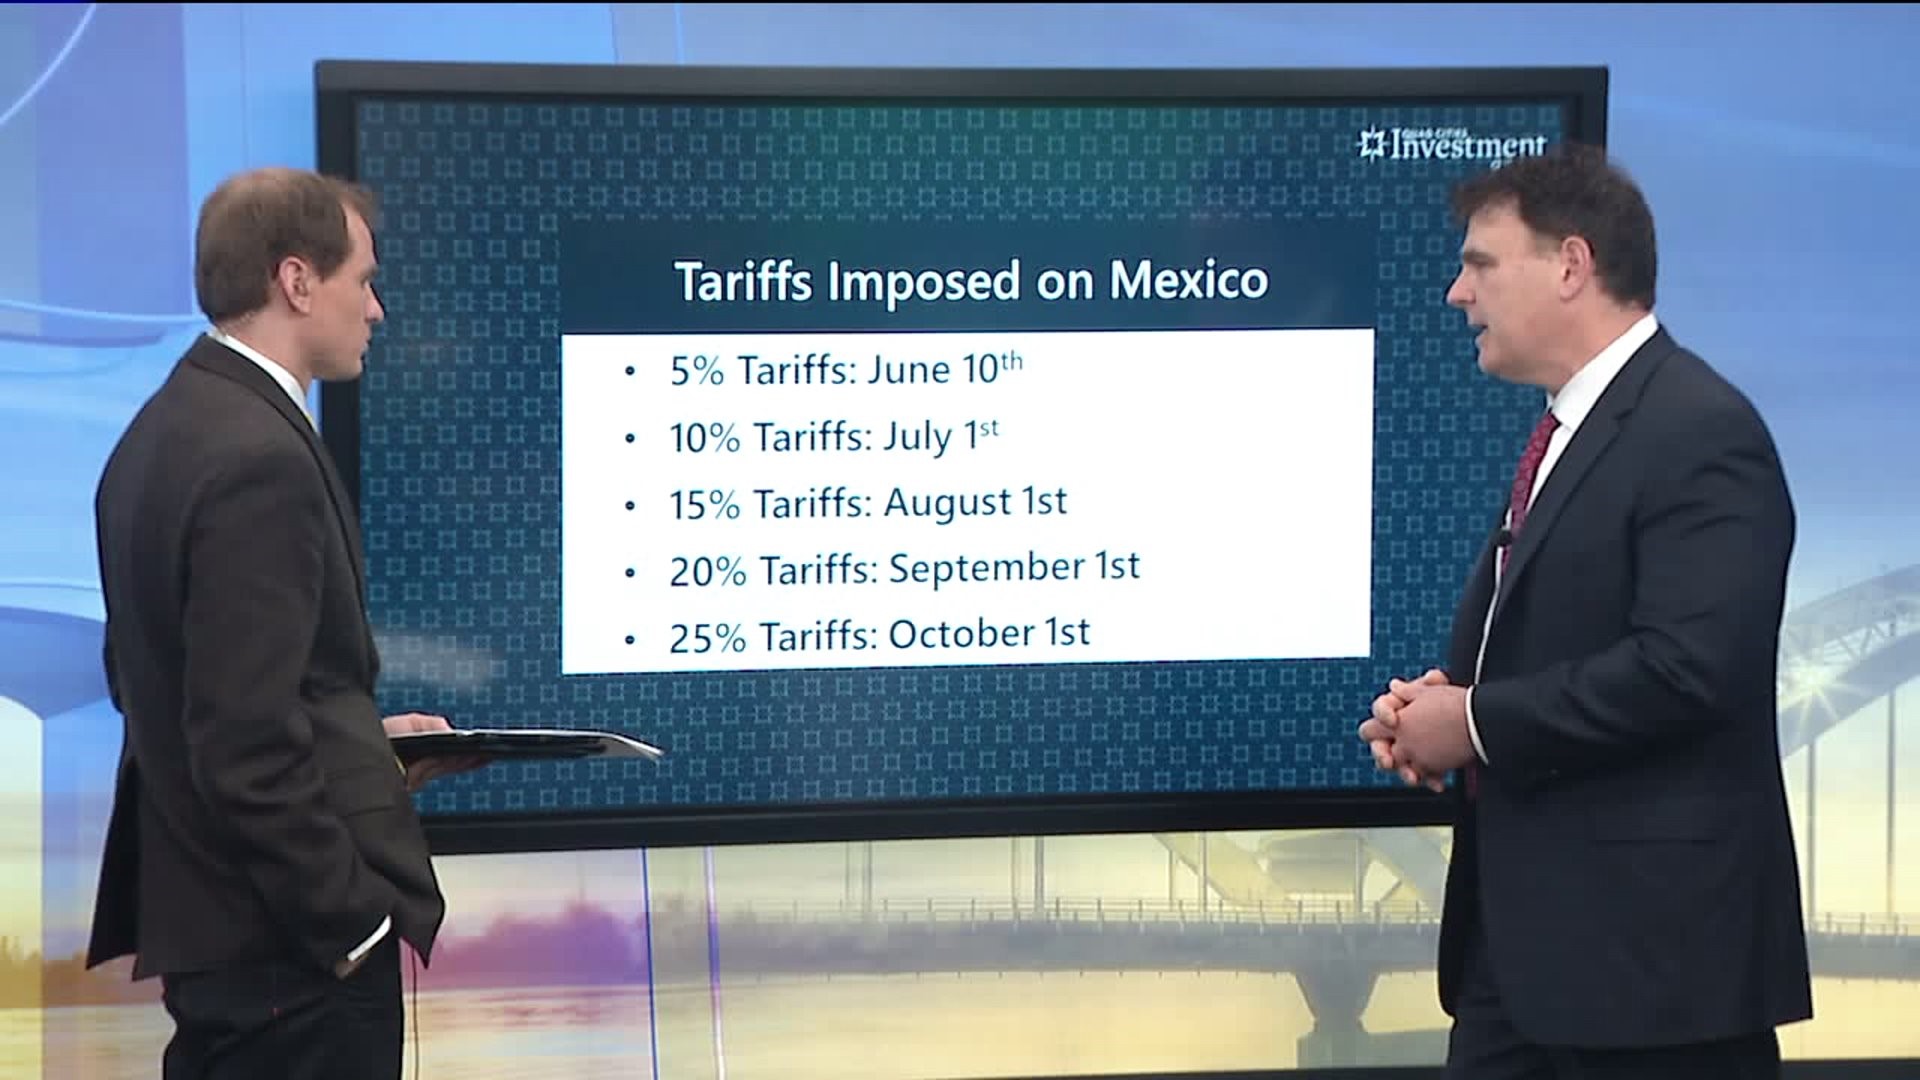 Your Money with Mark Grywcheski: Tariffs Imposed on Mexico